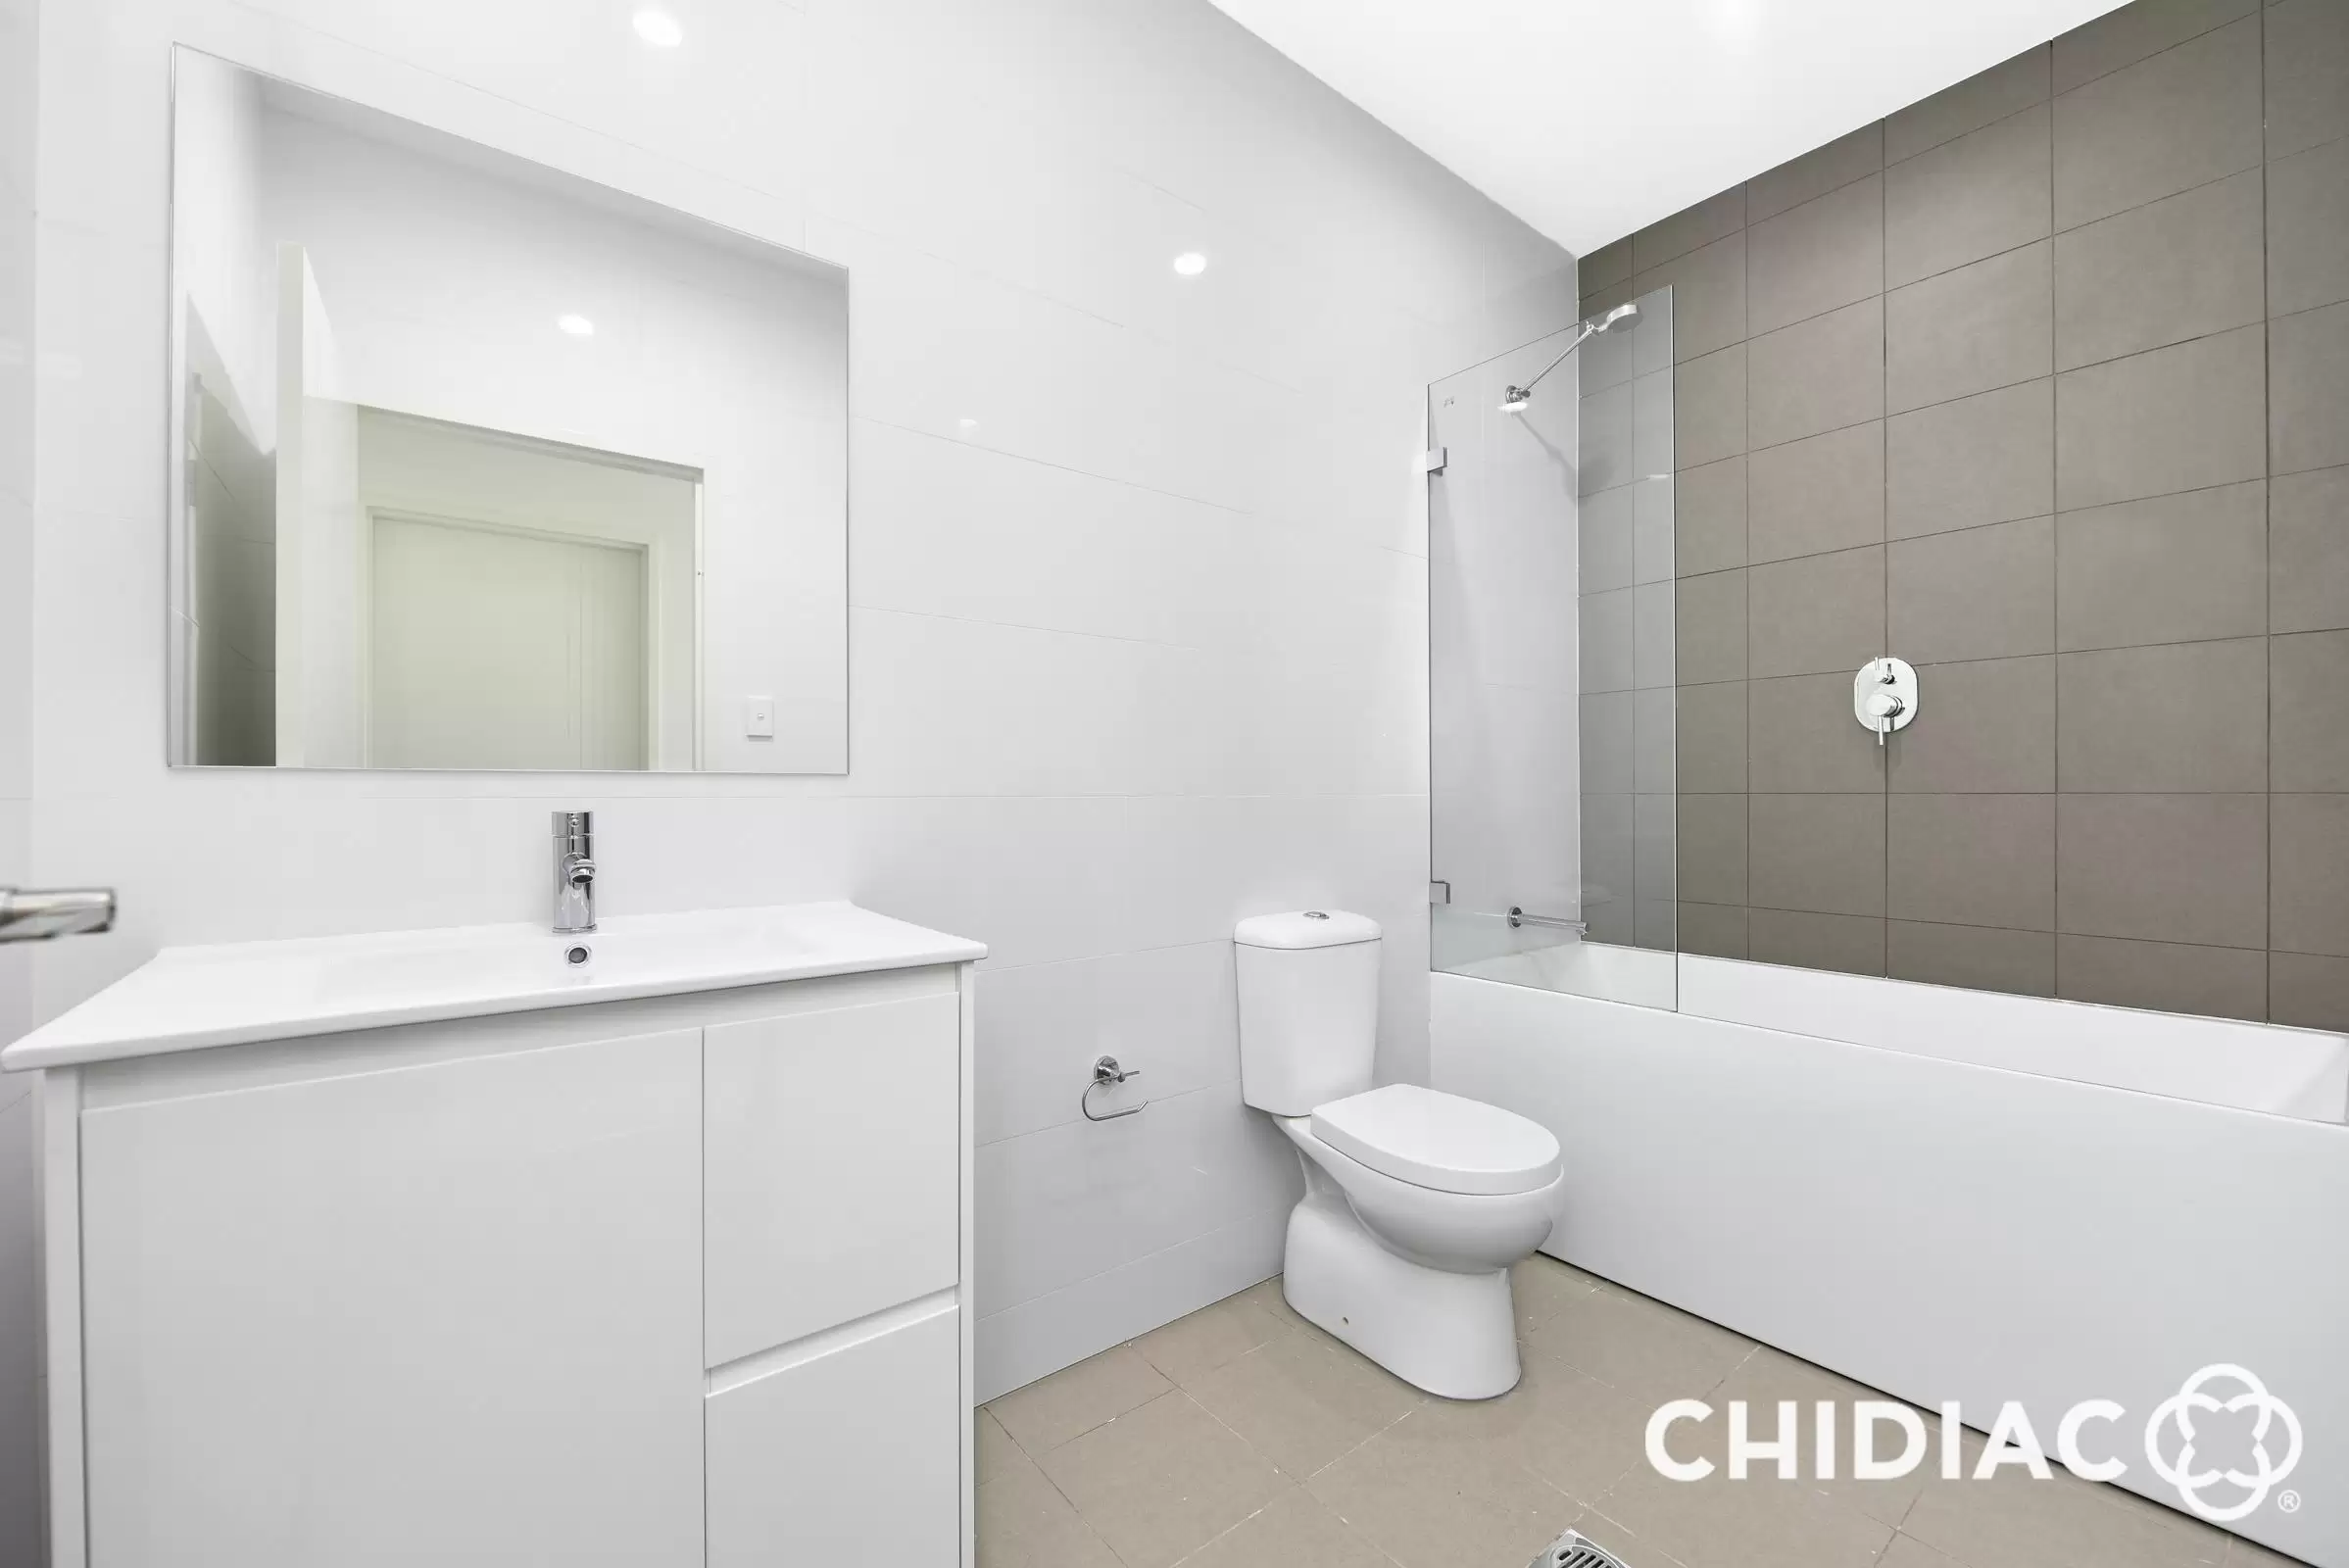 13/22 Burbang Crescent, Rydalmere Leased by Chidiac Realty - image 3